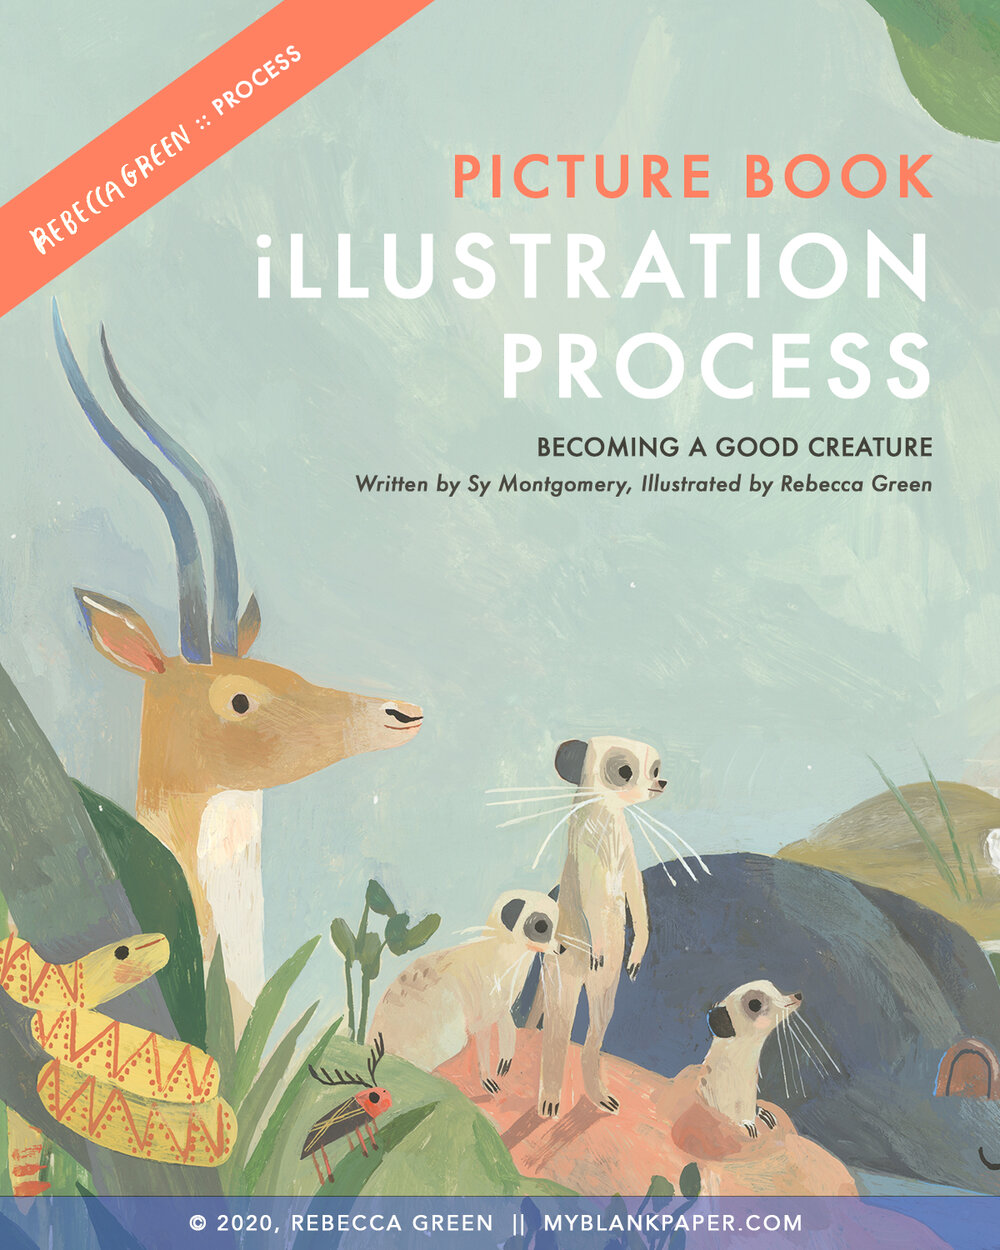 Becoming A Good Creature: Picture Book Process! — Rebecca Green Illustration